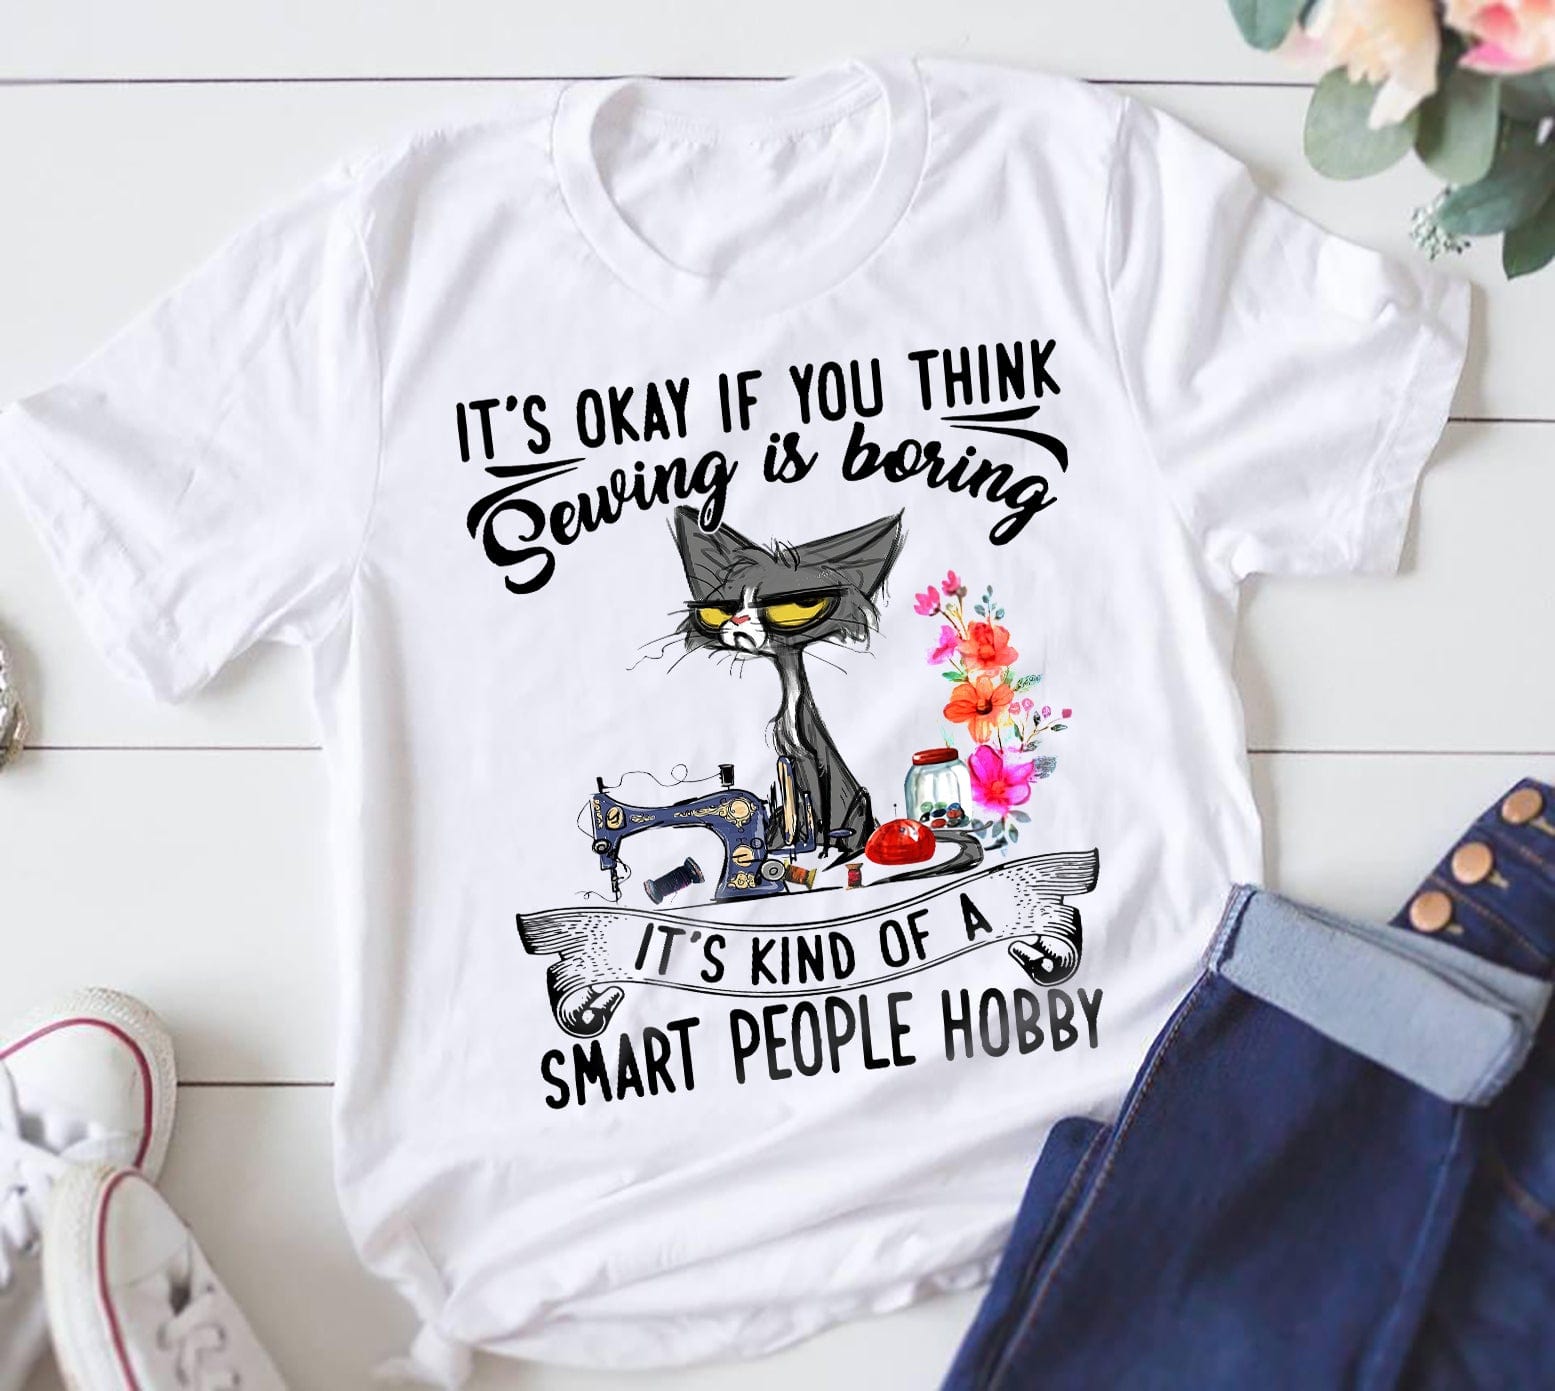 It's Okay If You Think Sewing Is Boring It's Kind Of A Smart People Hobby Shirt